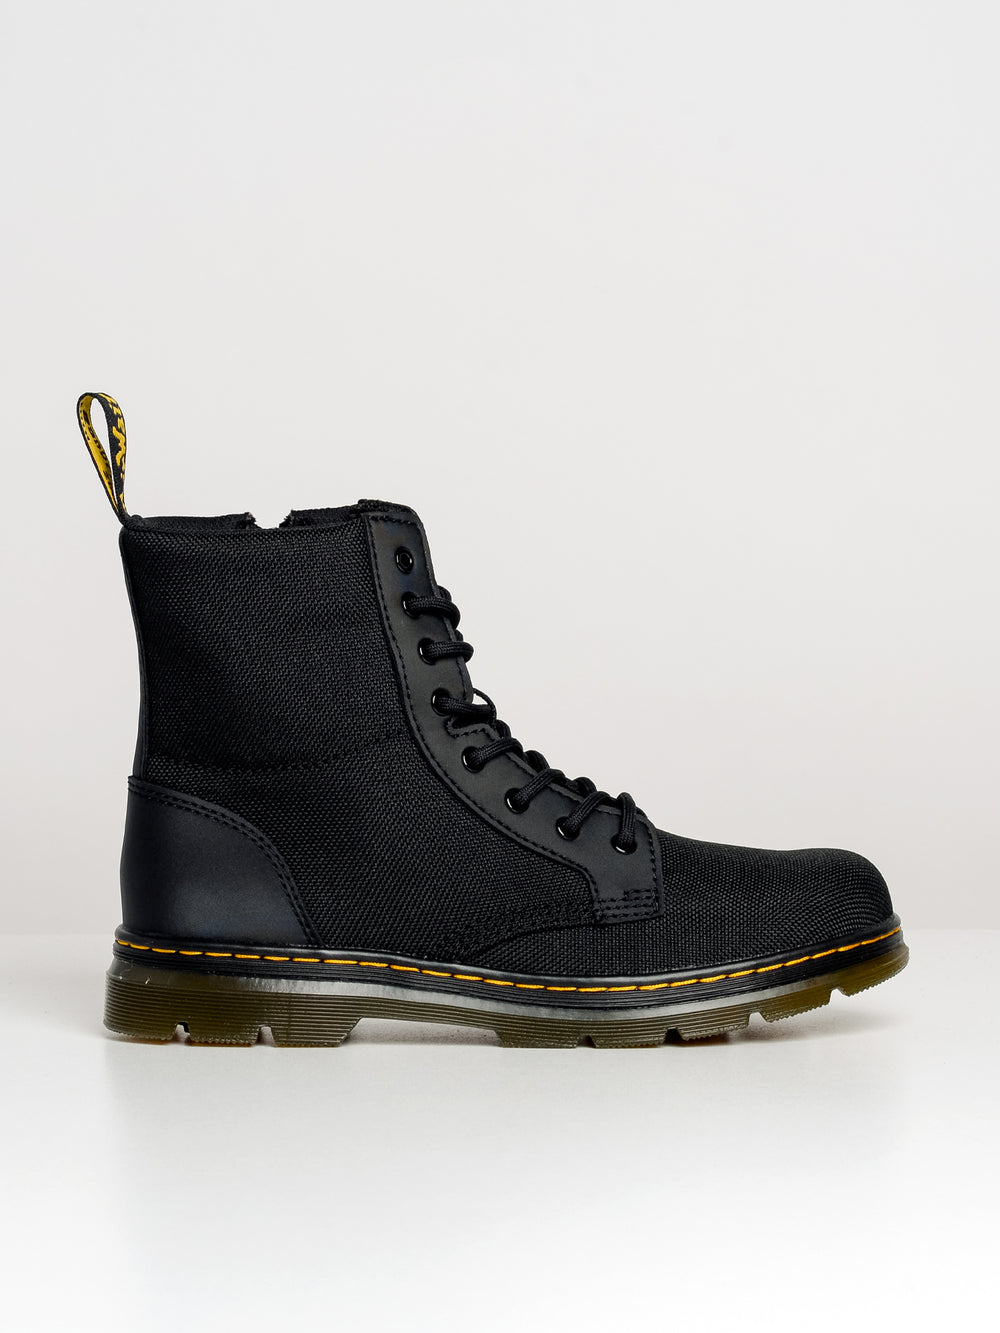 DR MARTENS KIDS COMBS YOUTH EXTRA TOUGH 50/50